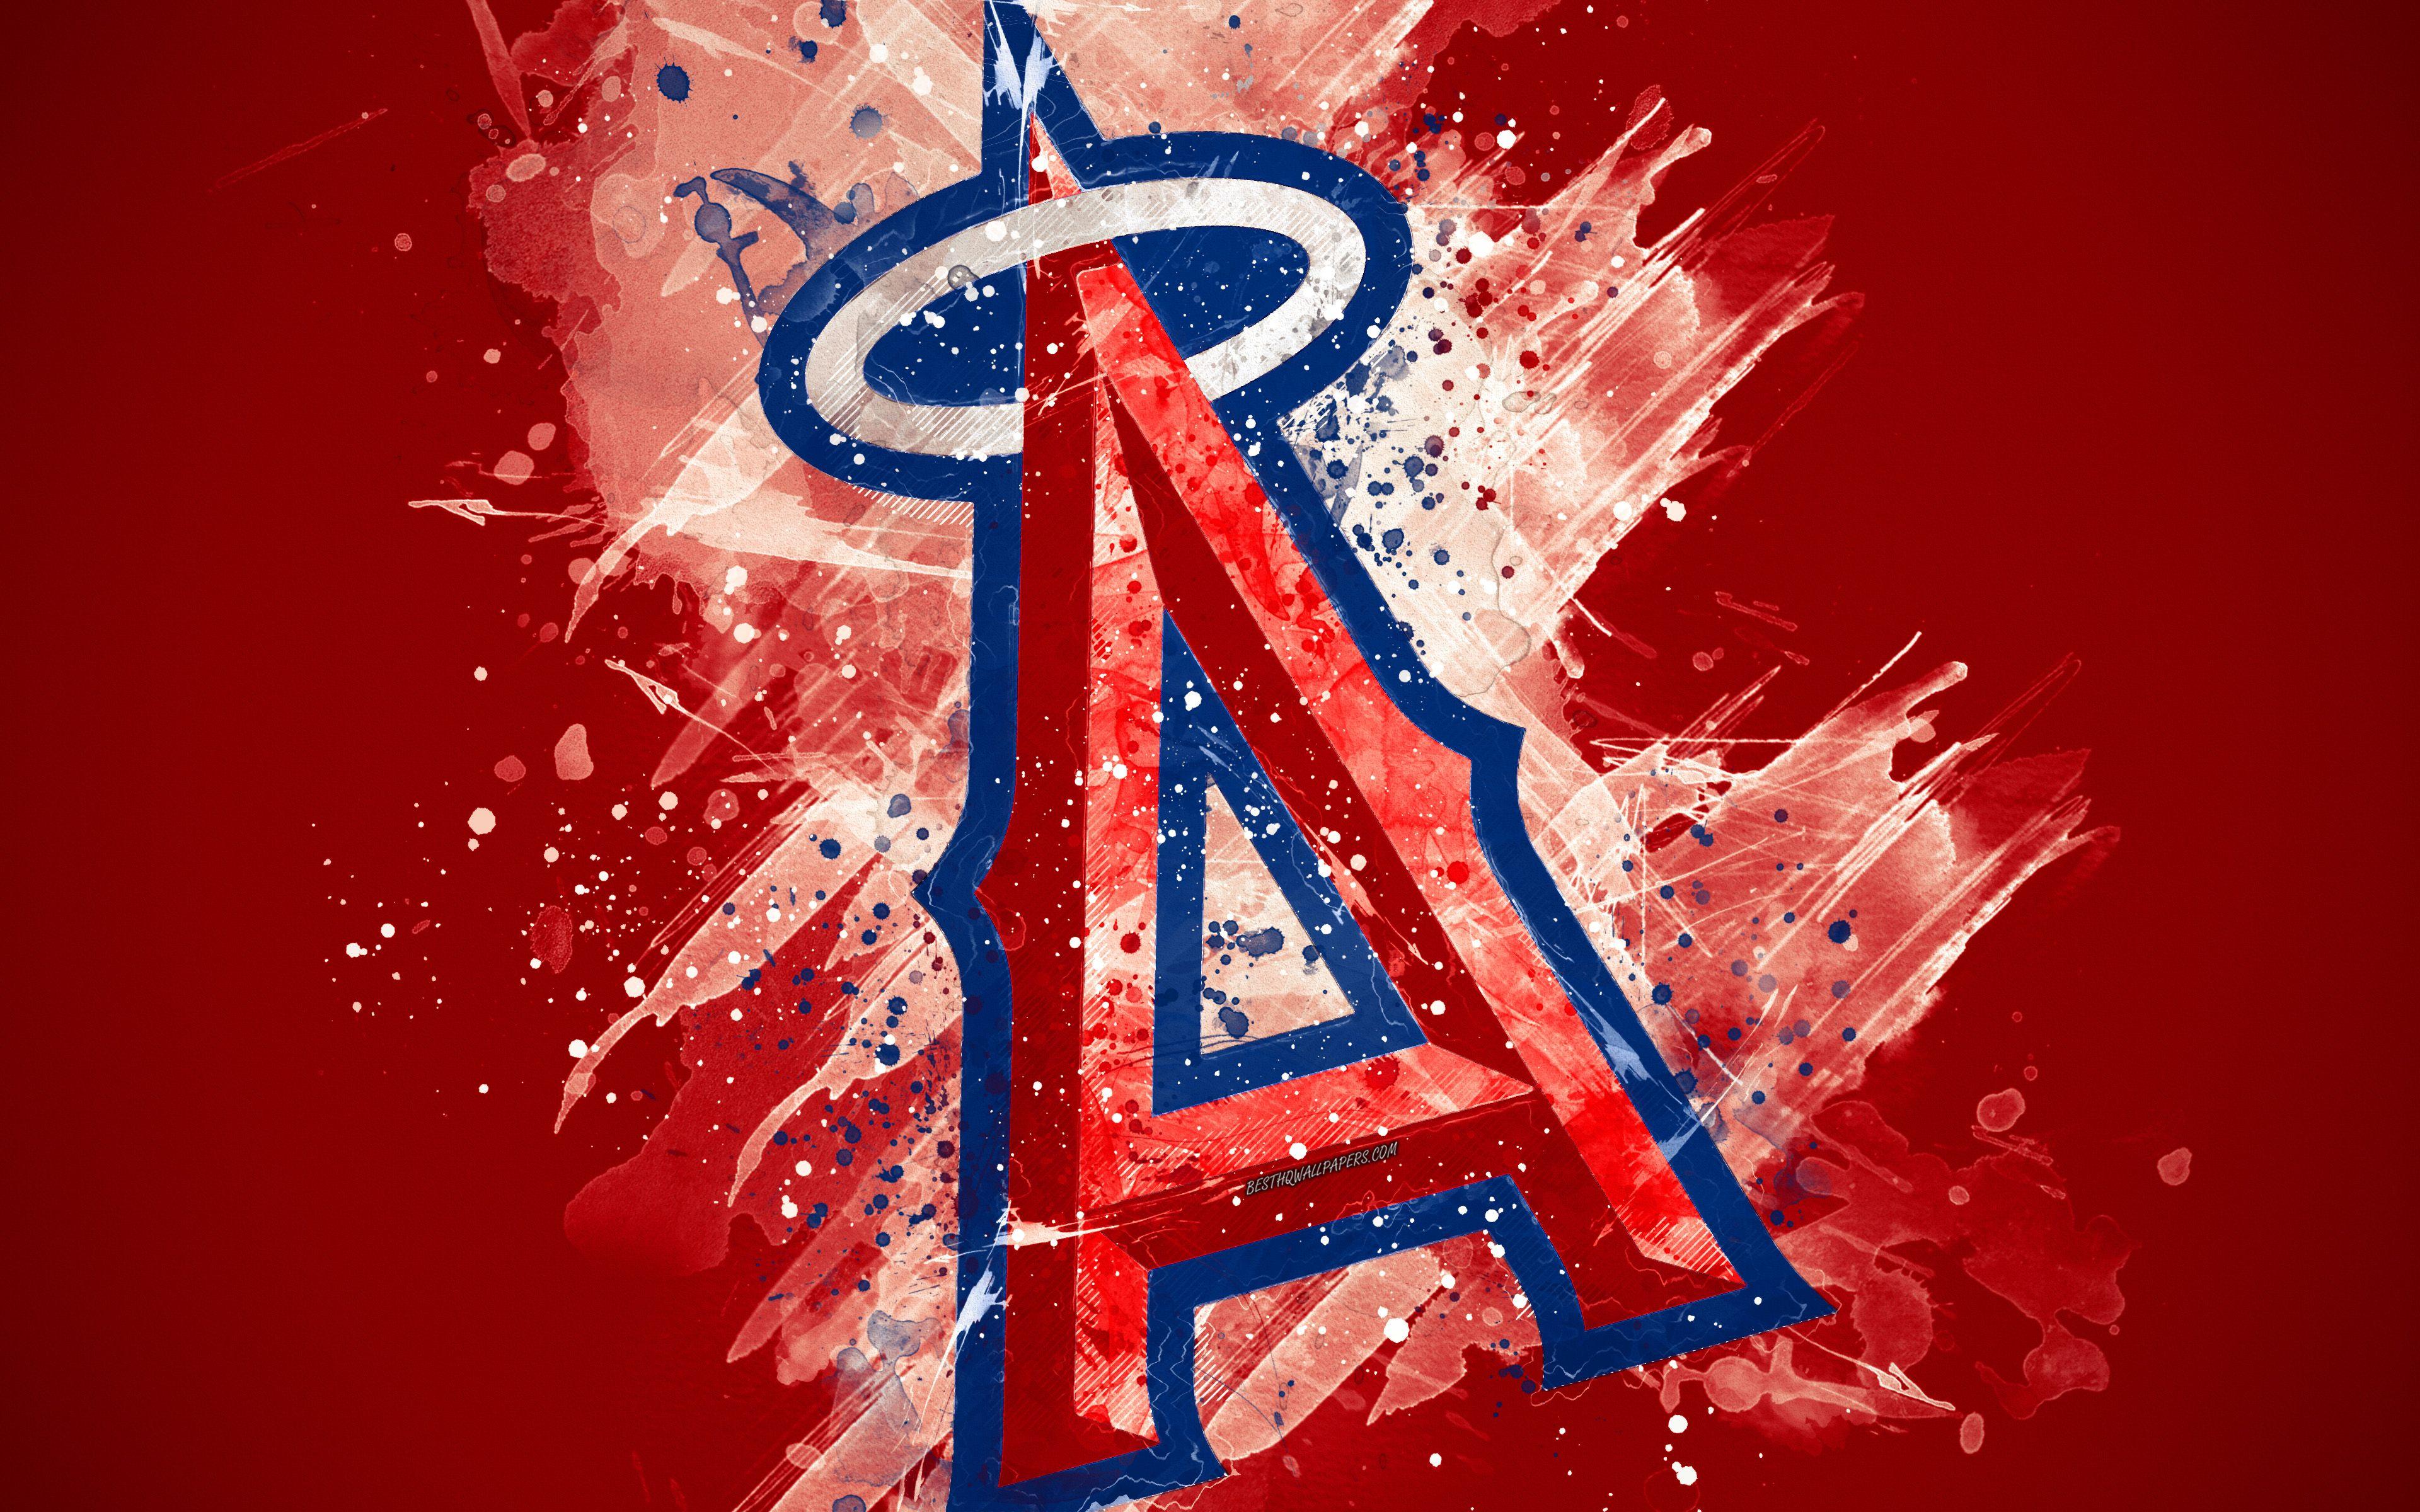 Download wallpapers Los Angeles Angels American baseball club creative 3D  logo red background 3d emblem MLB Anaheim California USA Major  League Baseball 3d art baseball 3d logo for desktop free Pictures for